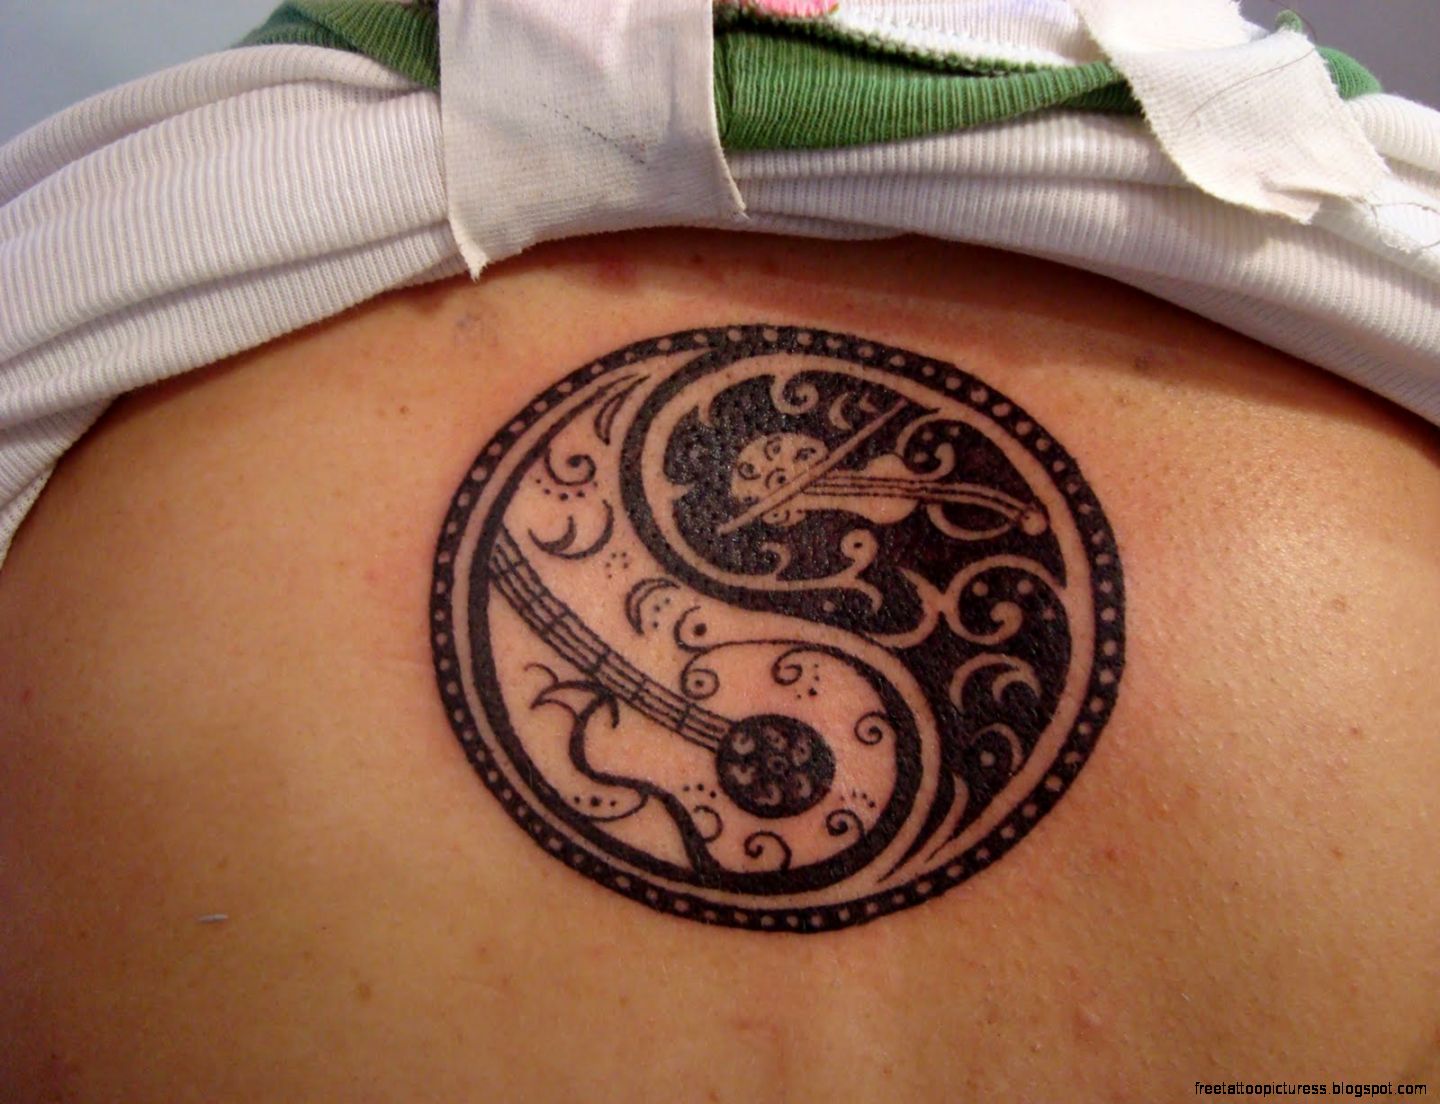 Yin Yang Tattoo Designs for Couples - wide 1